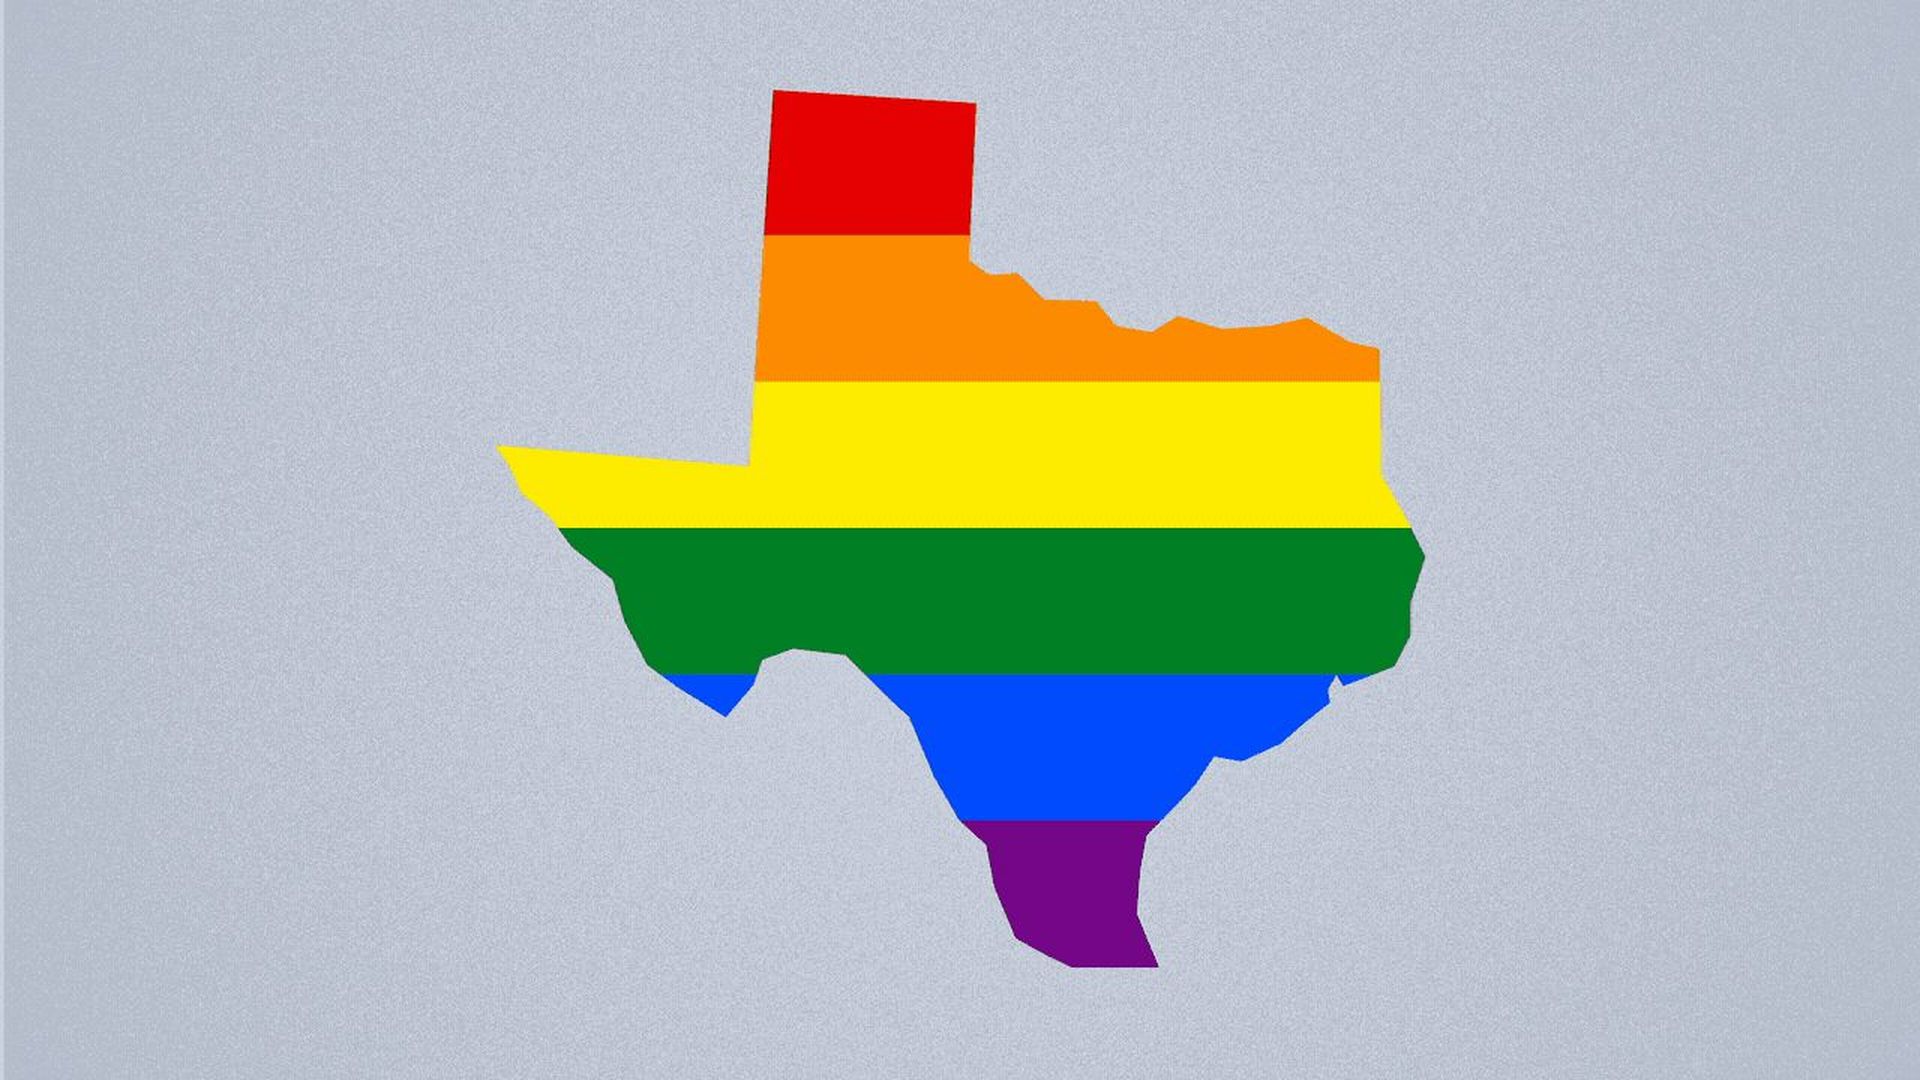 Illustration of the state of Texas with the LGBTQ Pride Flag colors in it.